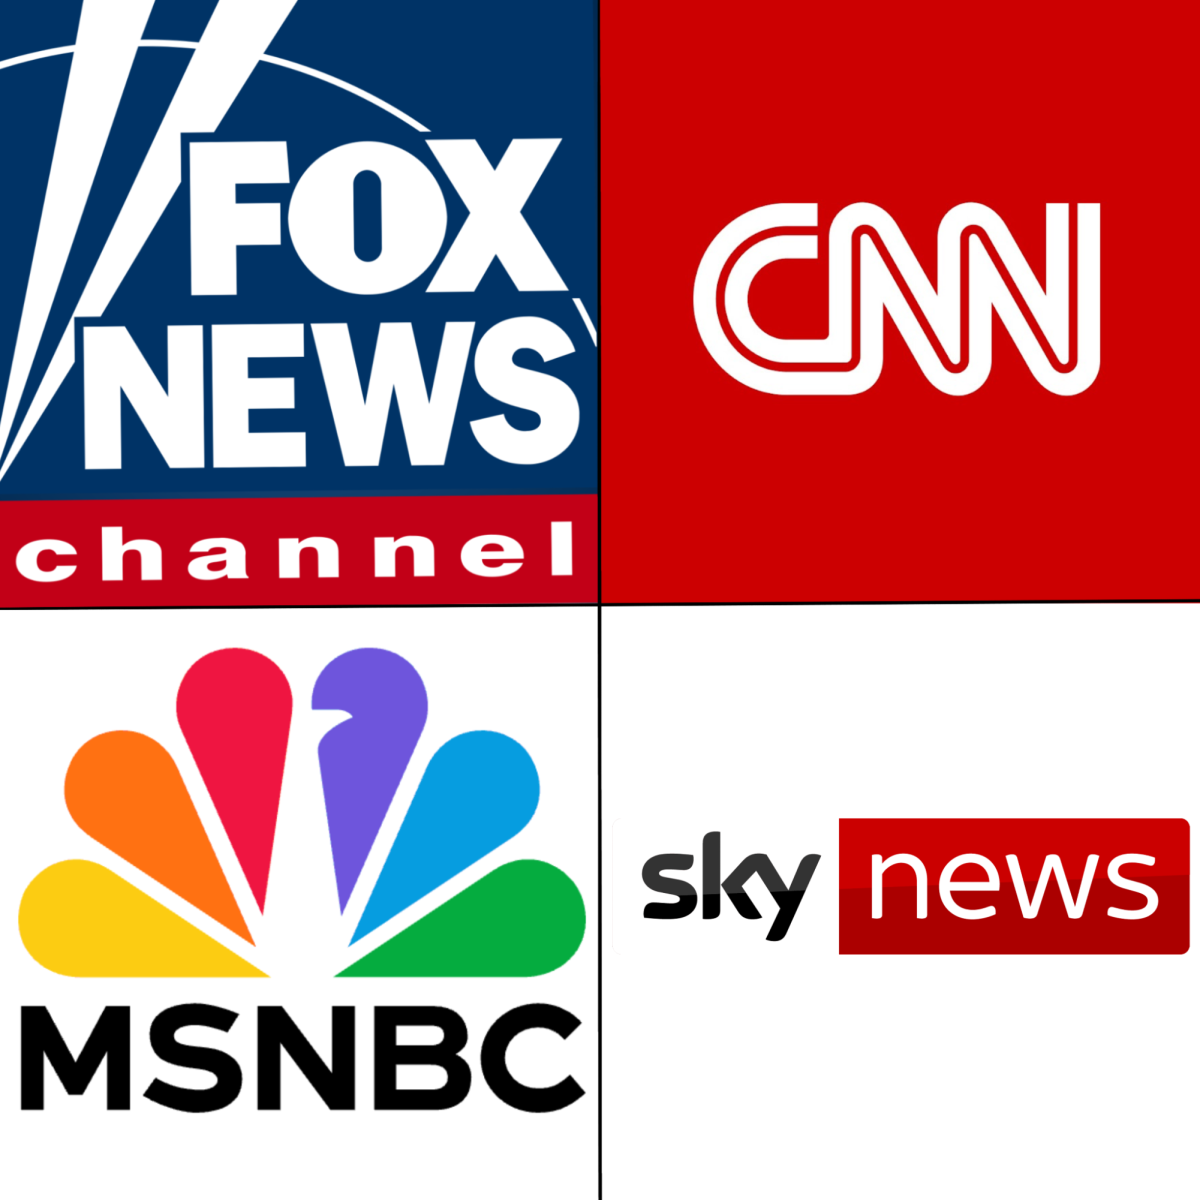 A collage containing the logos of various news networks is delayed including Fox news, CNN, MSNBC, and Sky News.